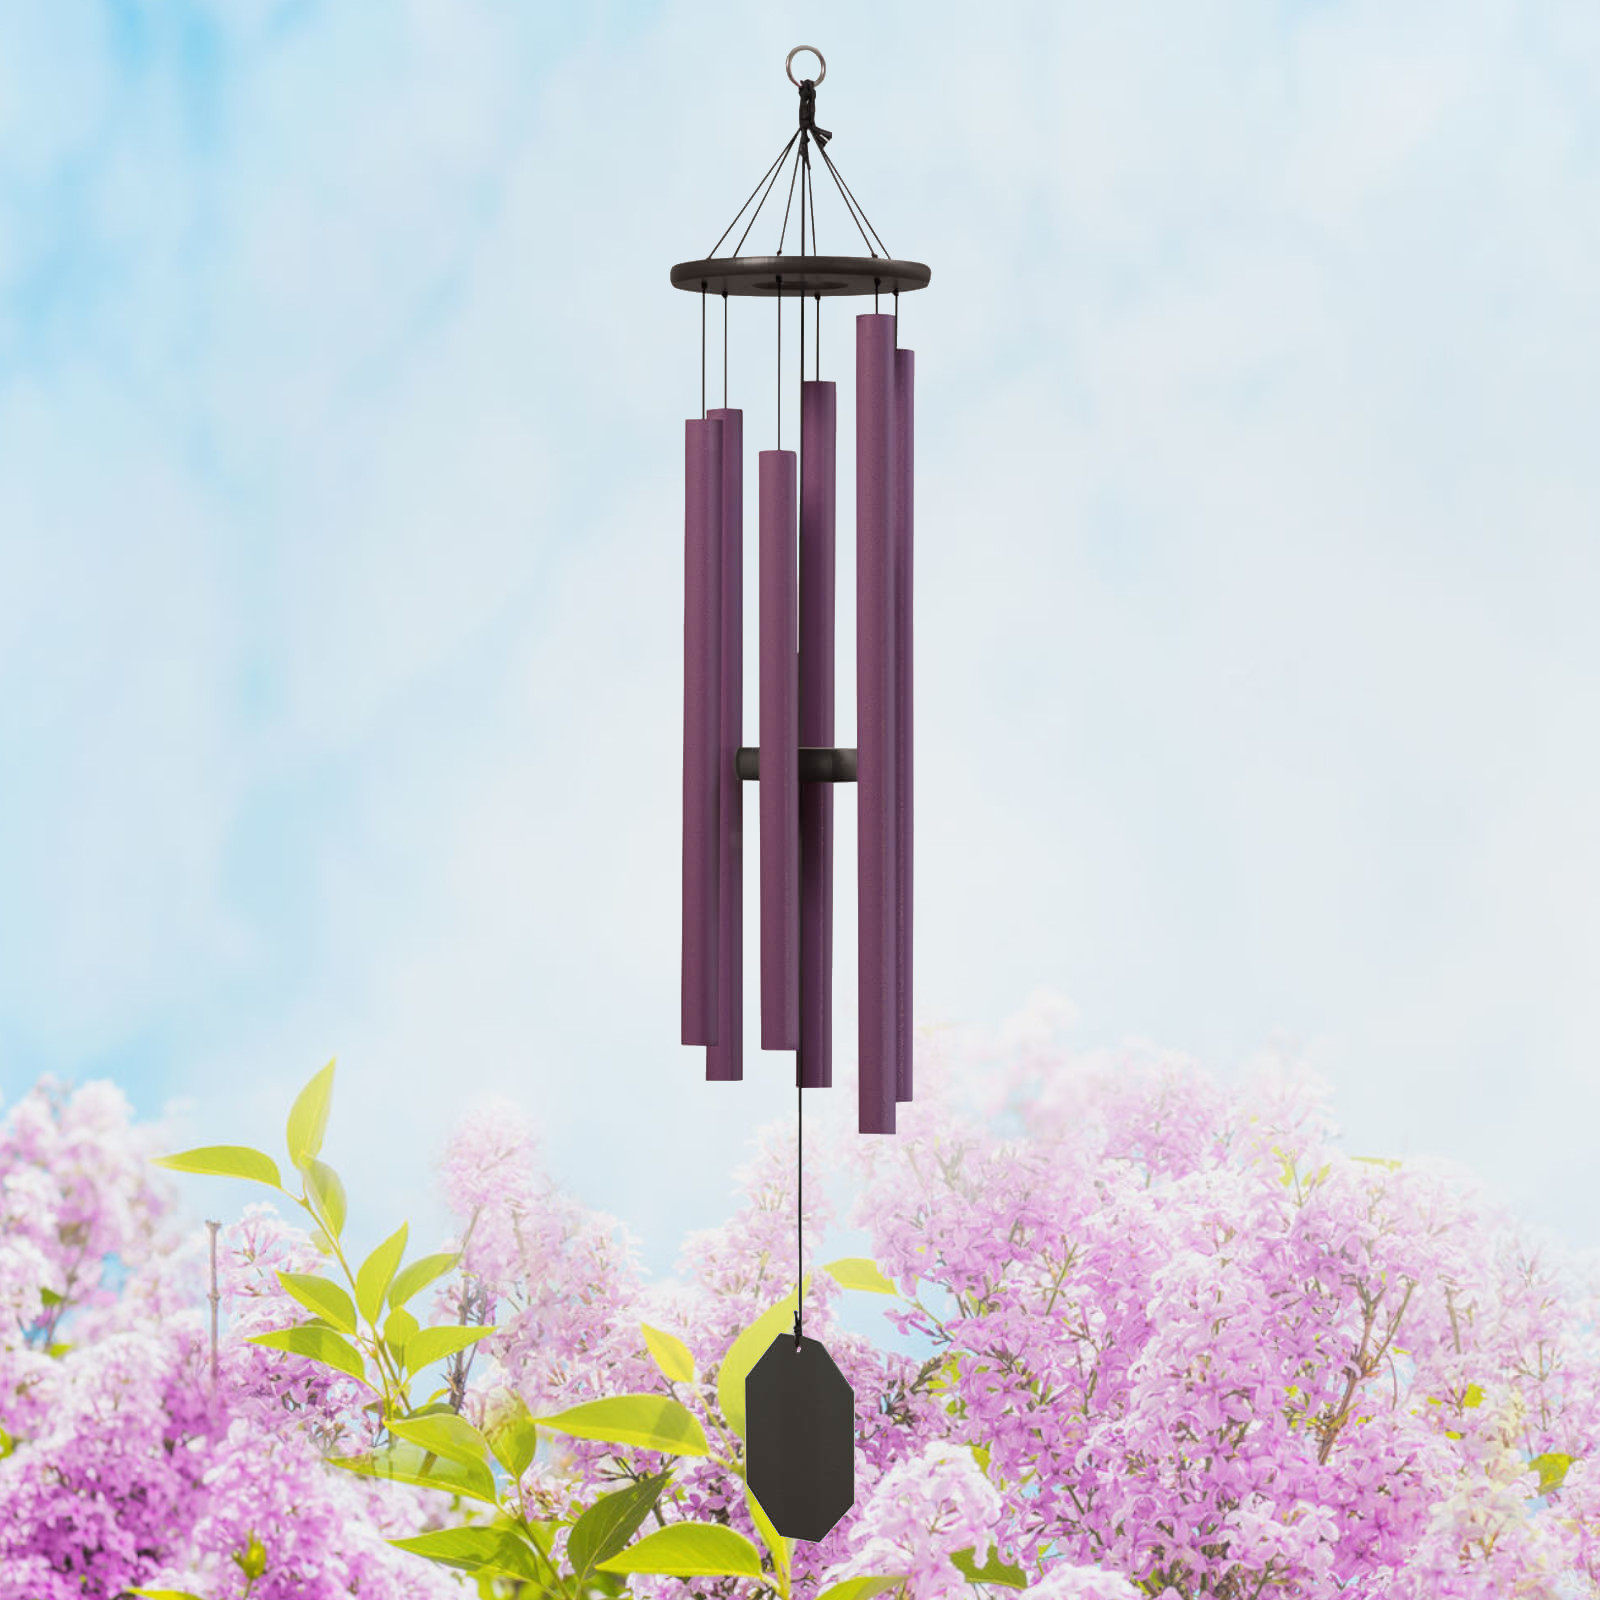 Lambright Country Chimes 49" Canterbury Bells Wind Chime